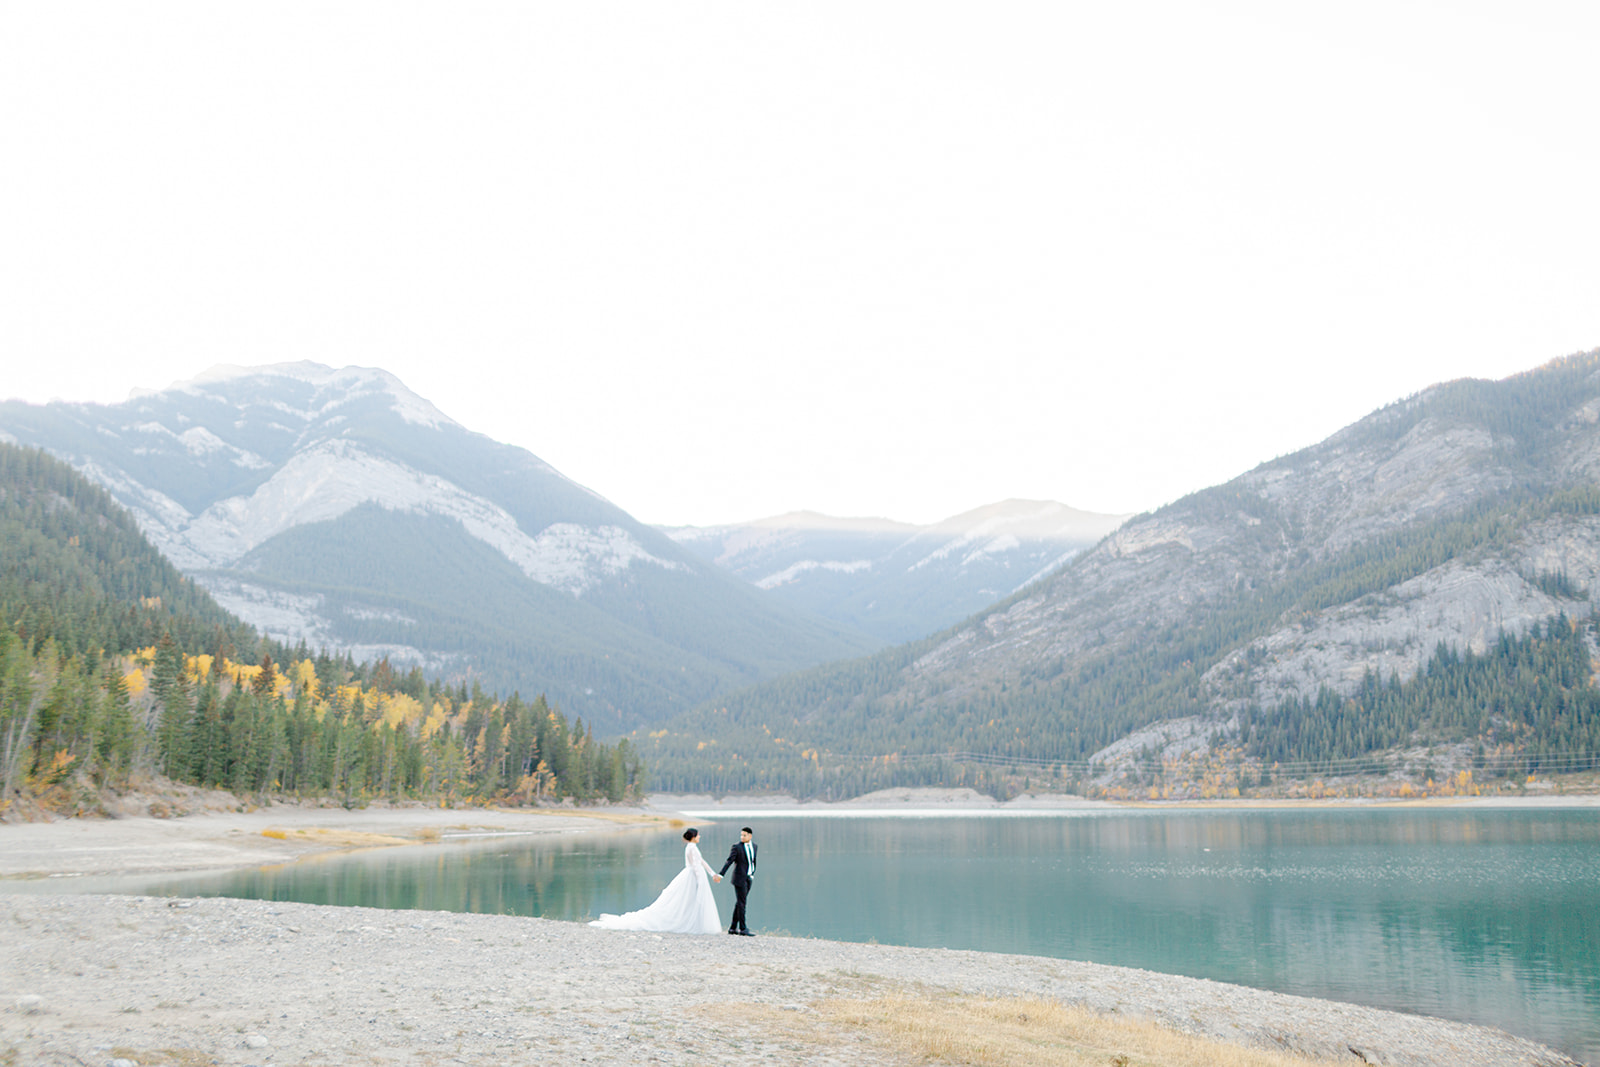 Turquoise waters in the Rocky Mountains as the perfect backdrop for an elegant Engagement Session